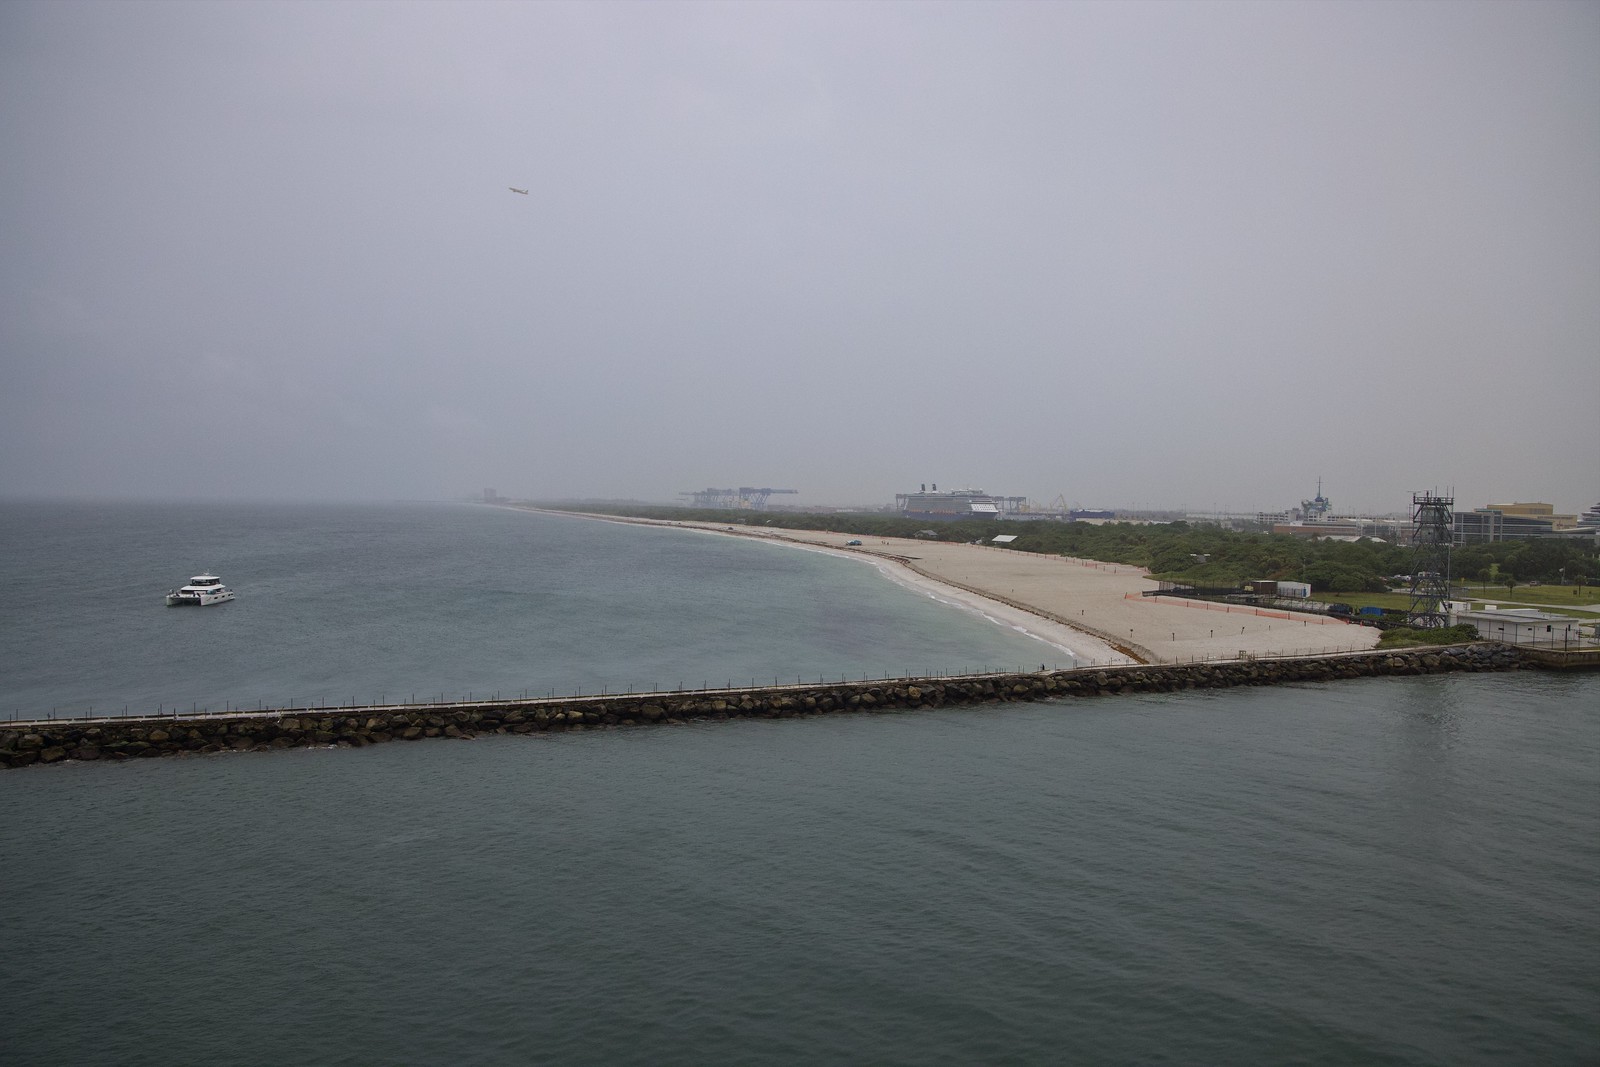 Our ship leaves port, passing the breakwater and beach in the rain as an airliner climbs out from the airport